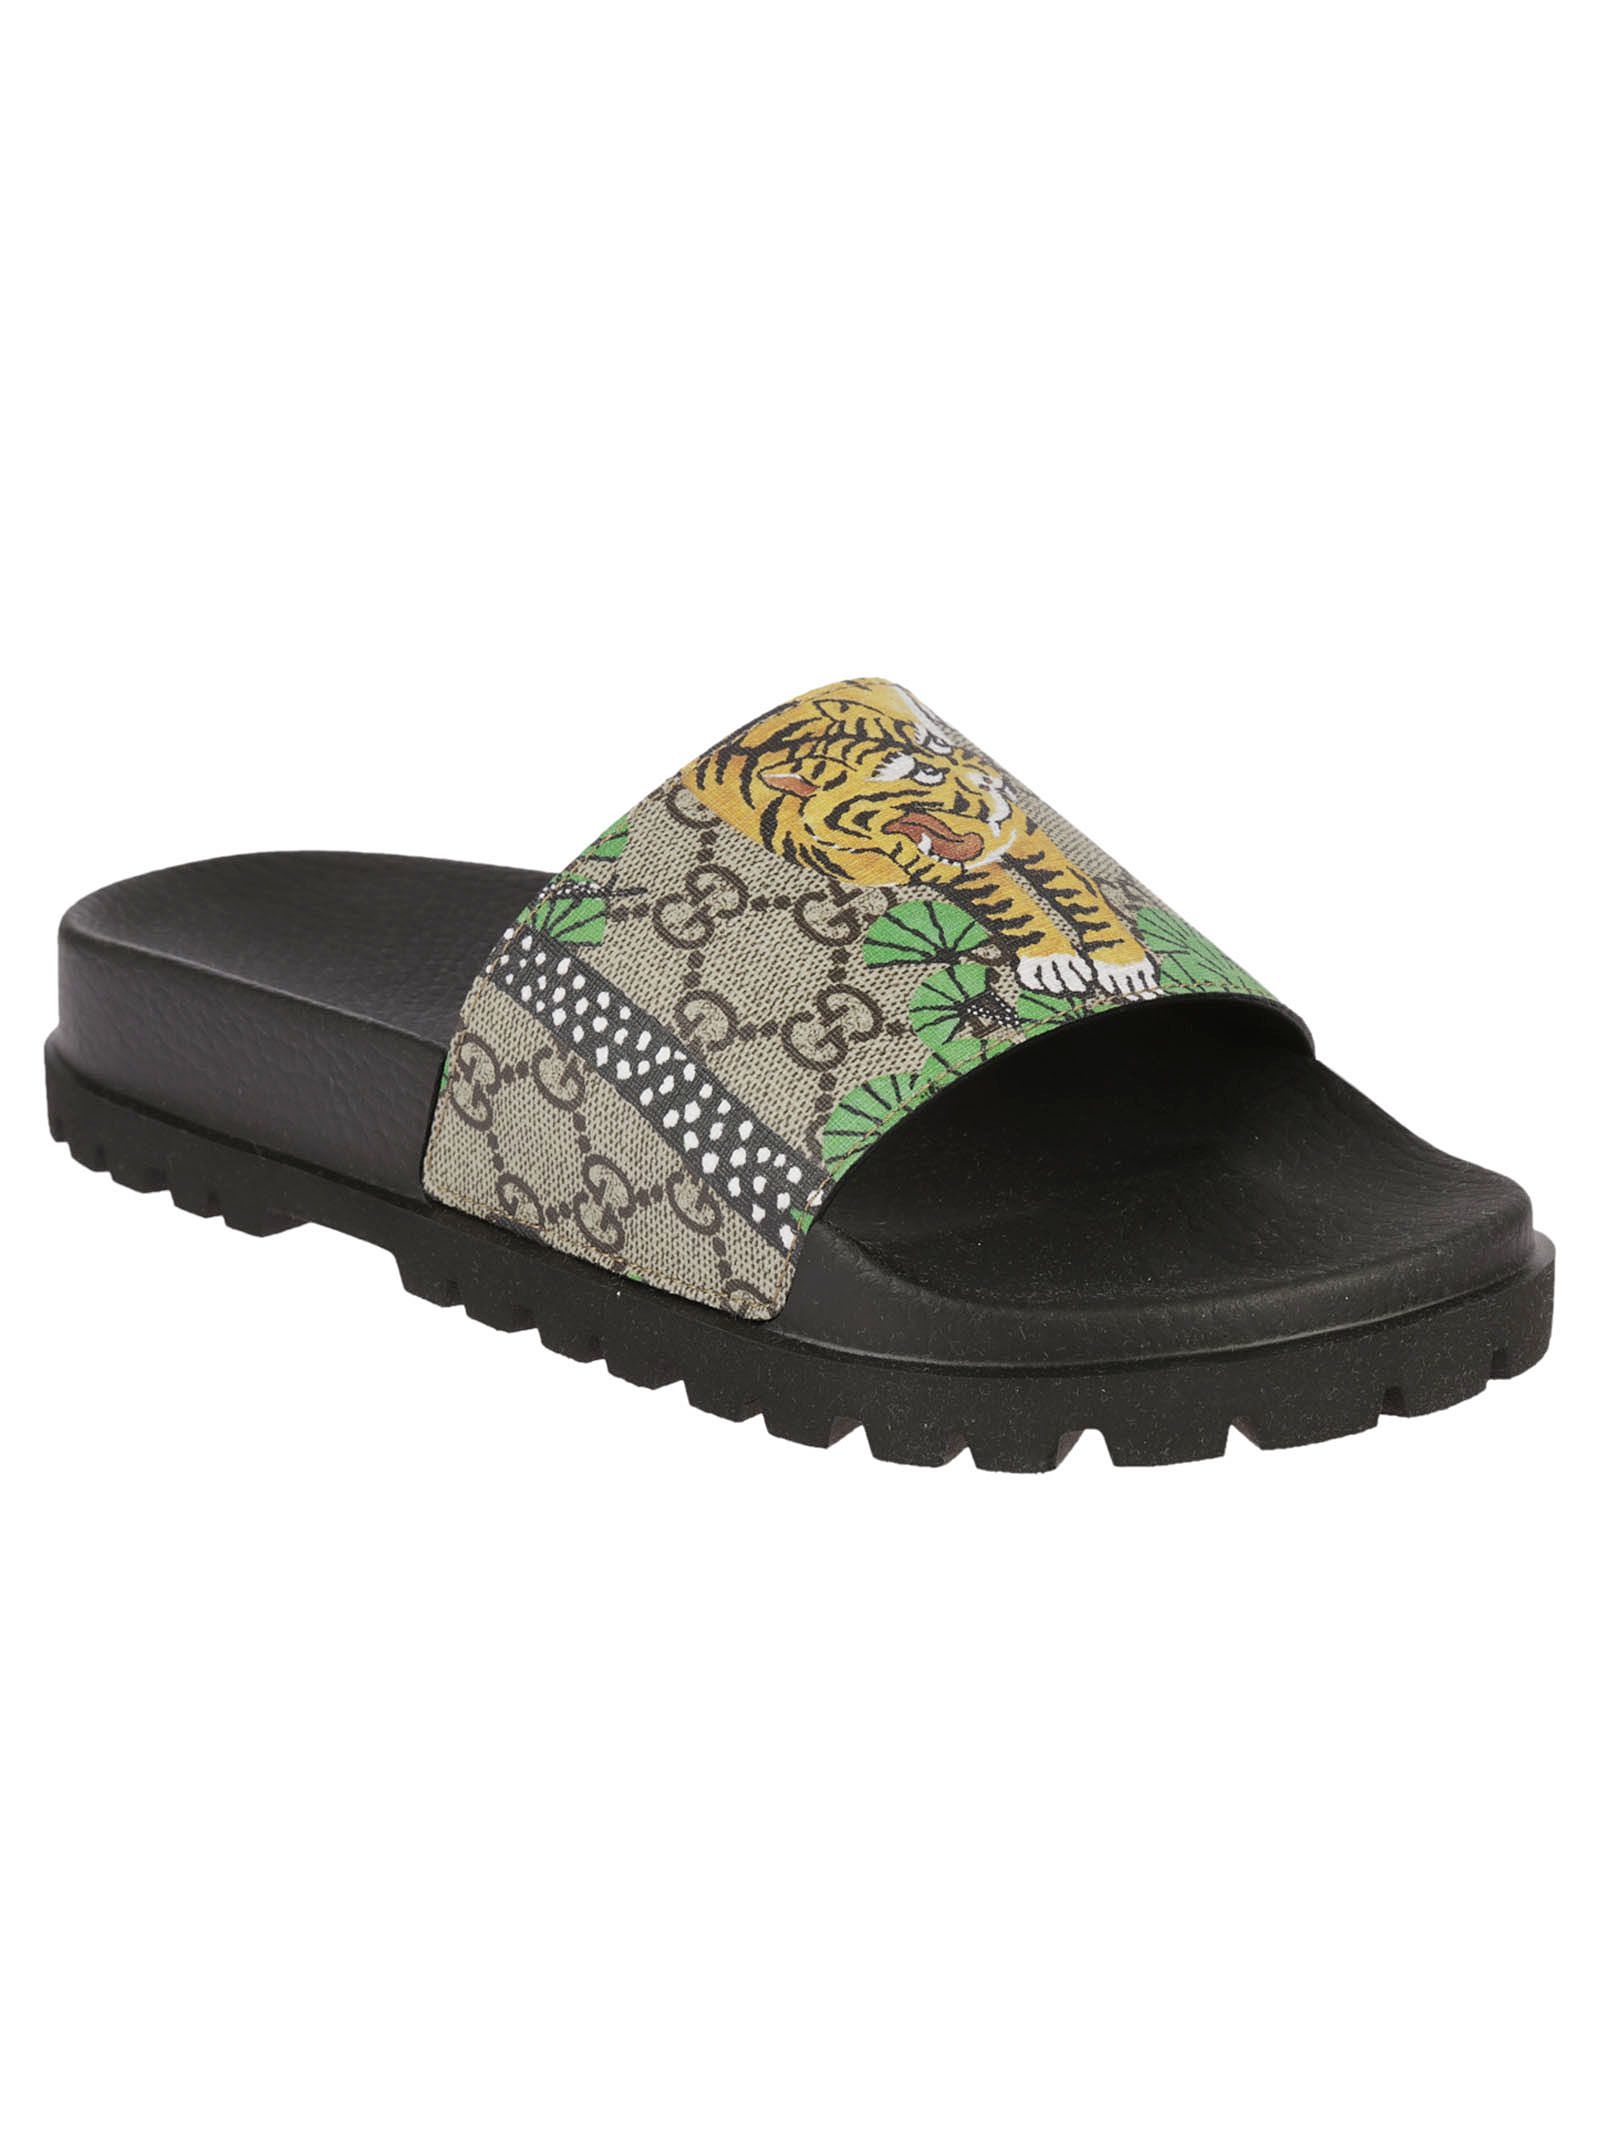 Gucci - Gucci Bengal Sliders - Black/Beige, Men's Other Shoes | Italist